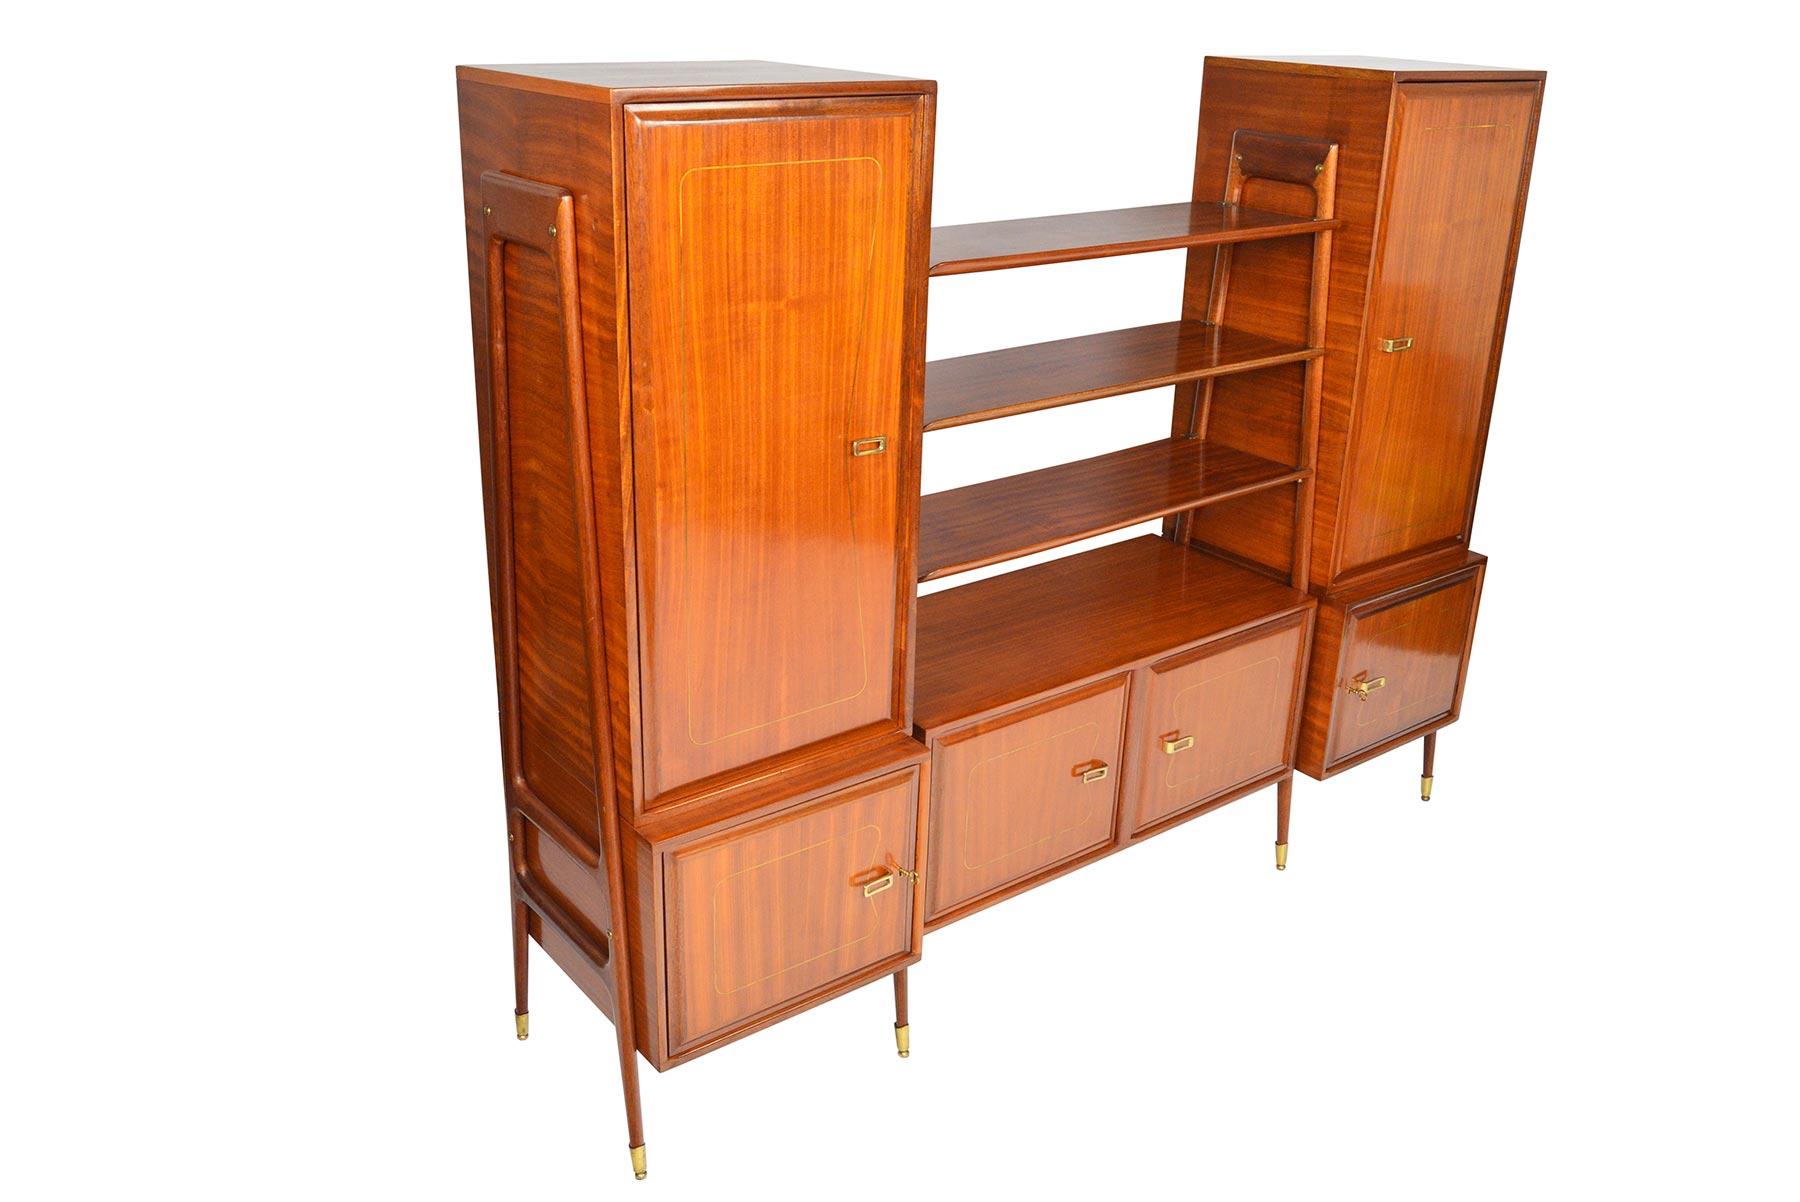 Designed in the 1960s in Italy, this bold and beautiful mahogany bookcase credenza offers exceptional craftsmanship and understated details. Brilliant brass inlays surround each door panel. Two tall cabinets, three smaller cabinets, and three